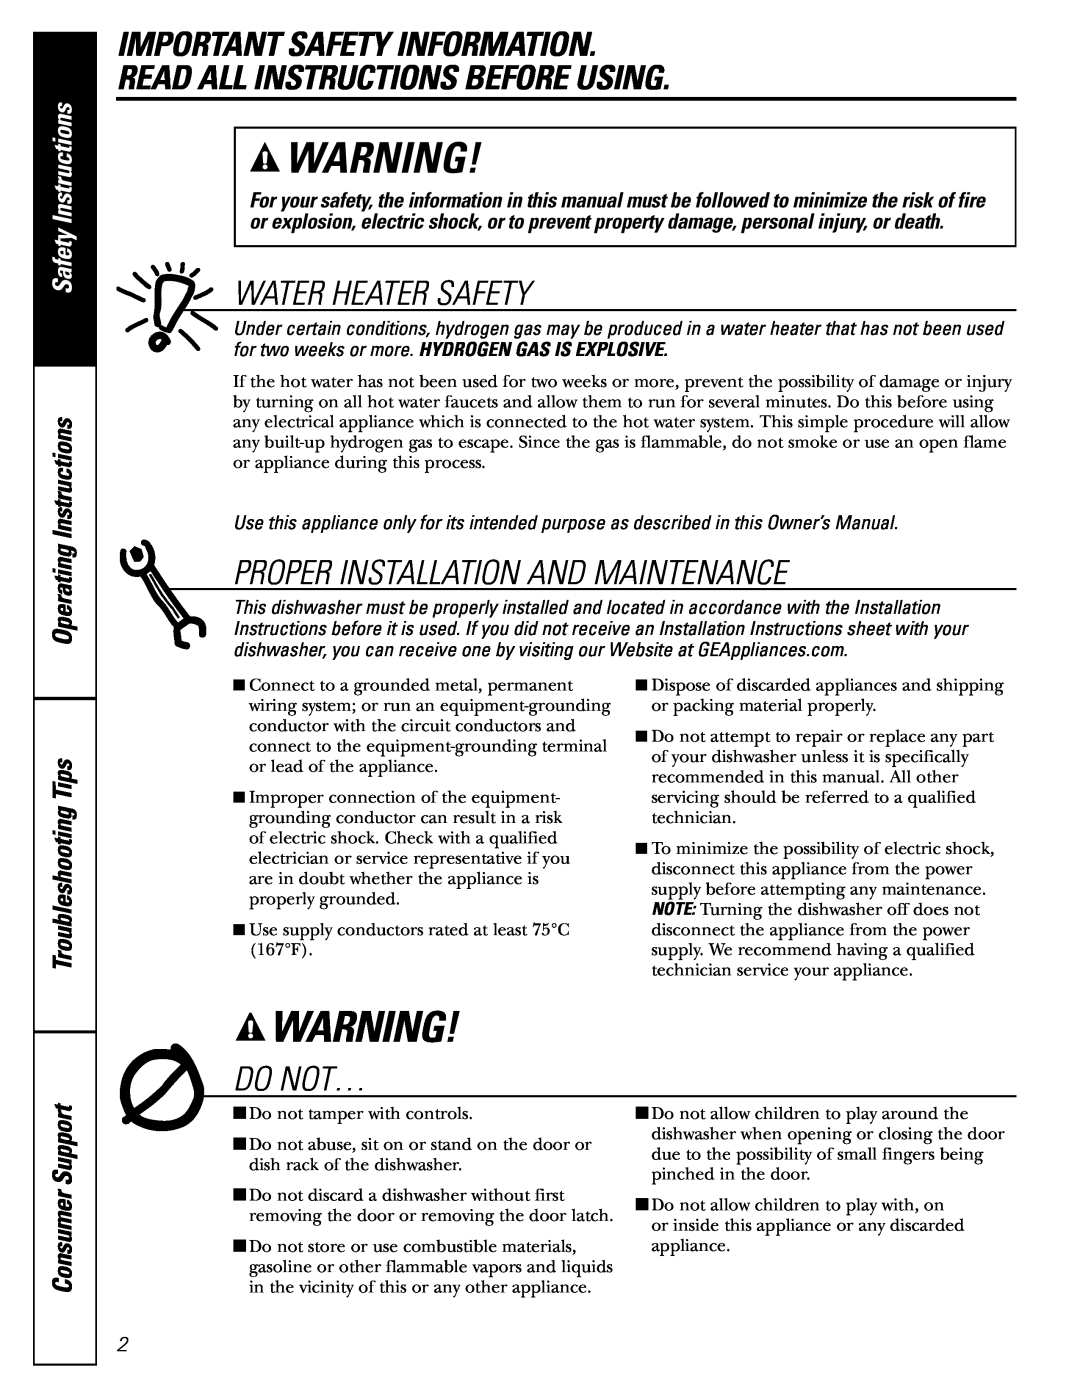 GE PDW8400 Important Safety Information Read All Instructions Before Using, Water Heater Safety, Do Not…, Consumer Support 